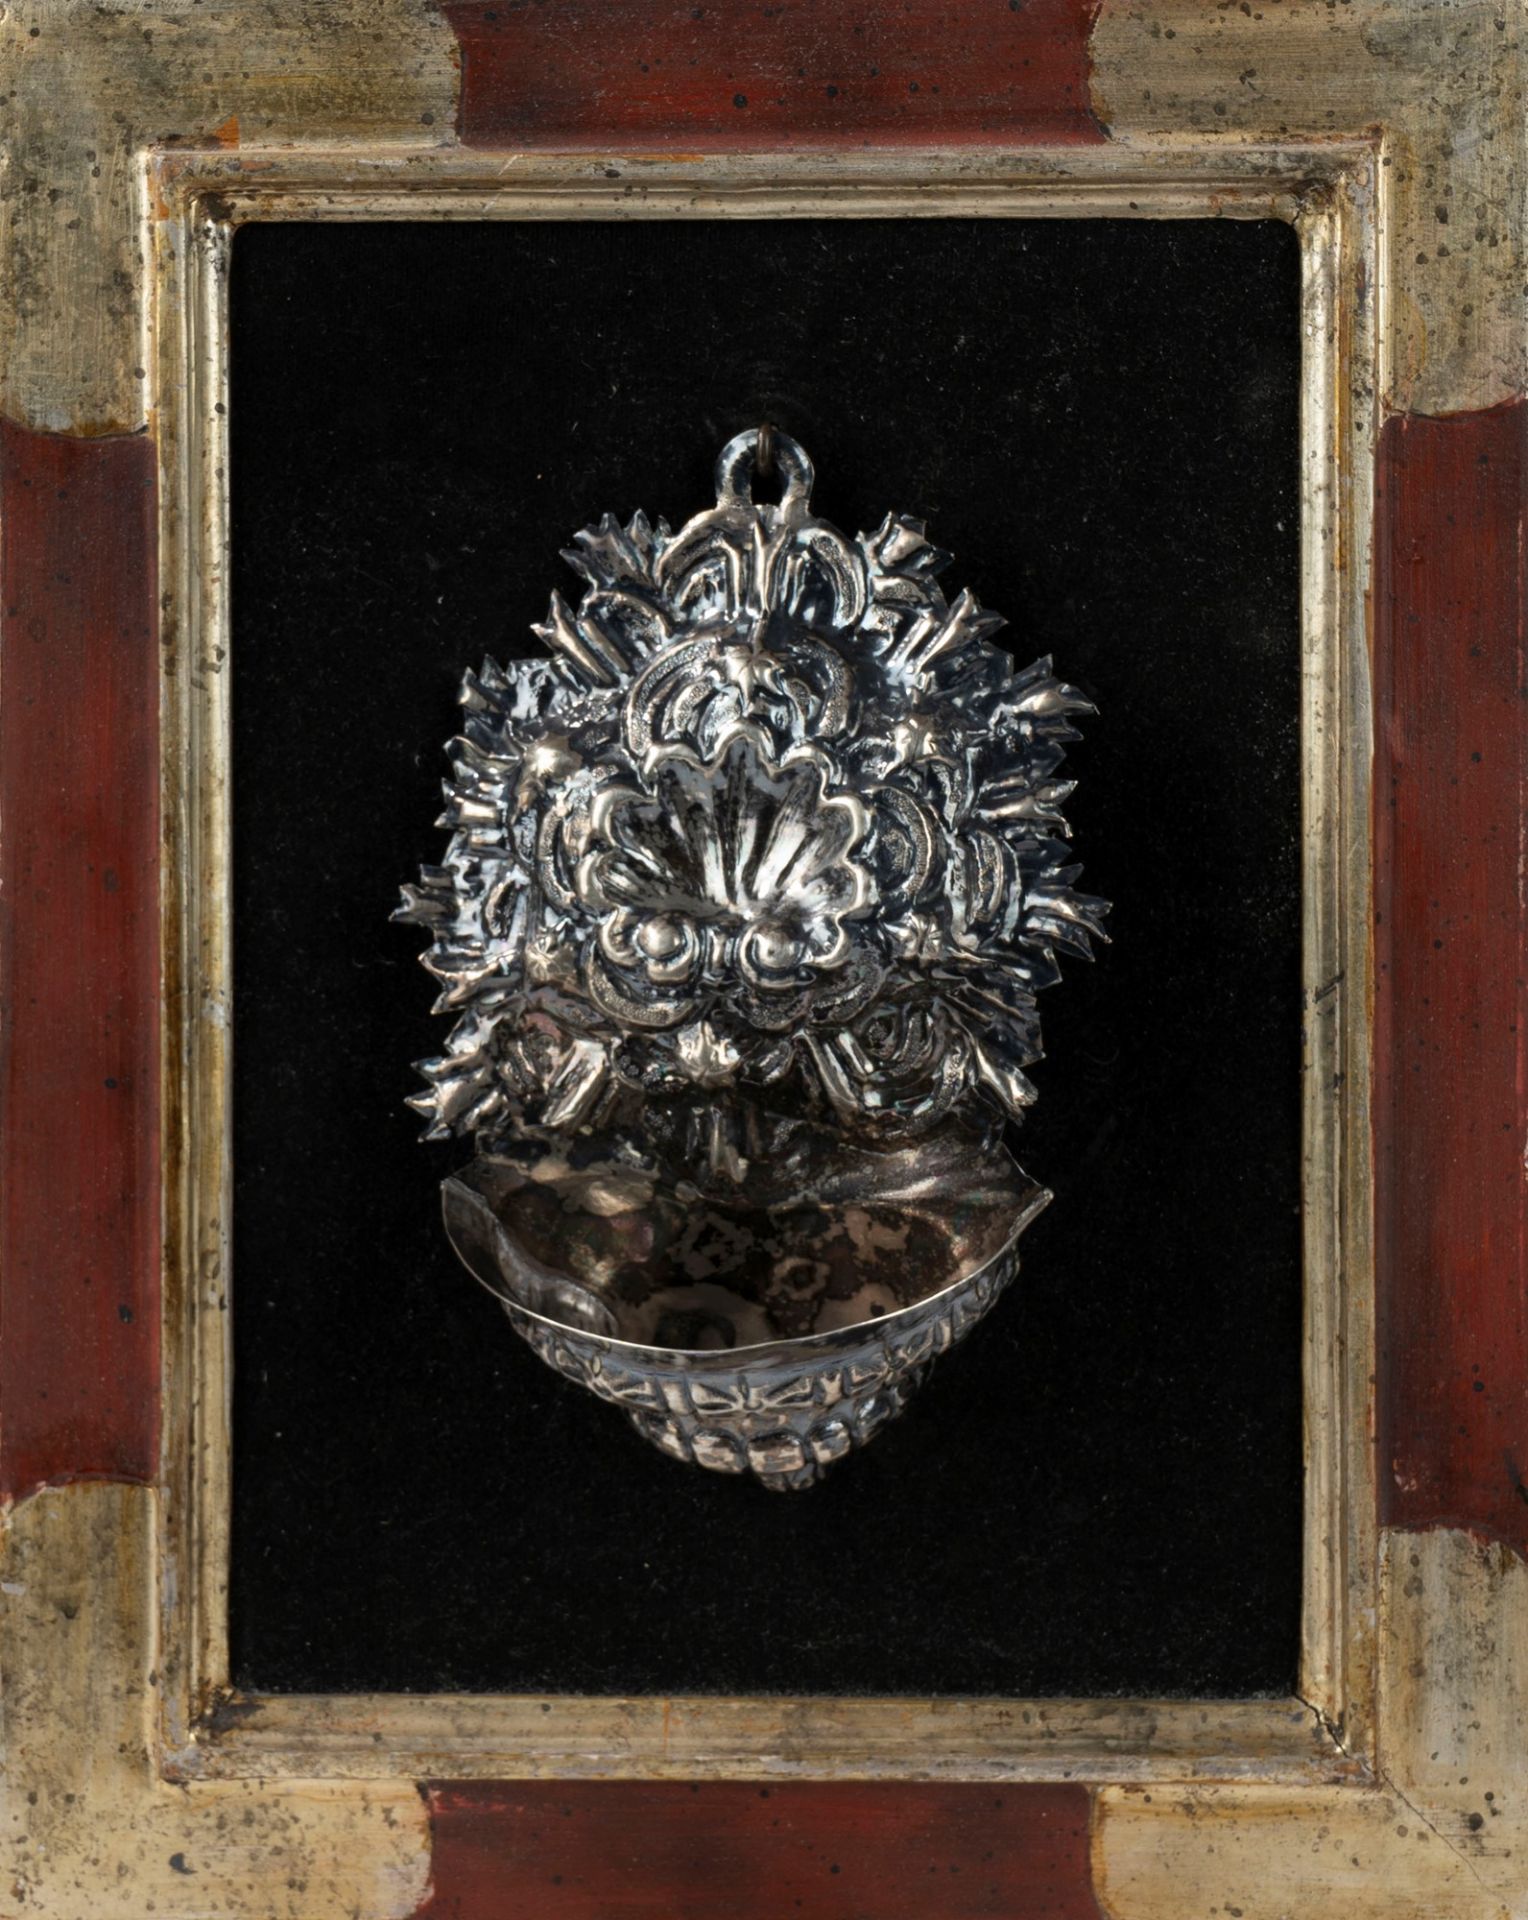 Silver stoup, 19th century